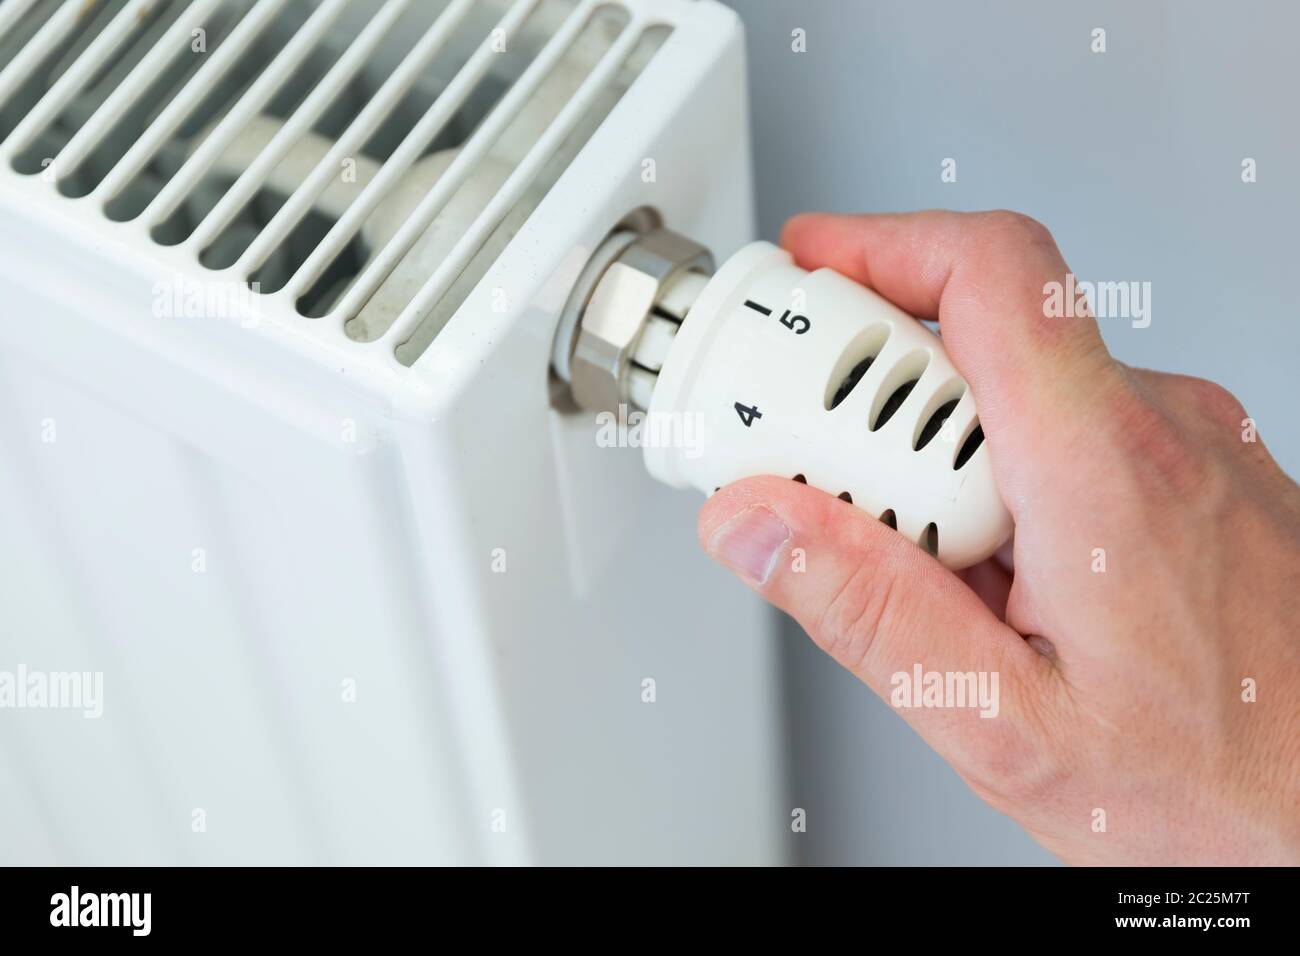 Hand adjusting thermostat valve of heating radiator in a room. Stock Photo